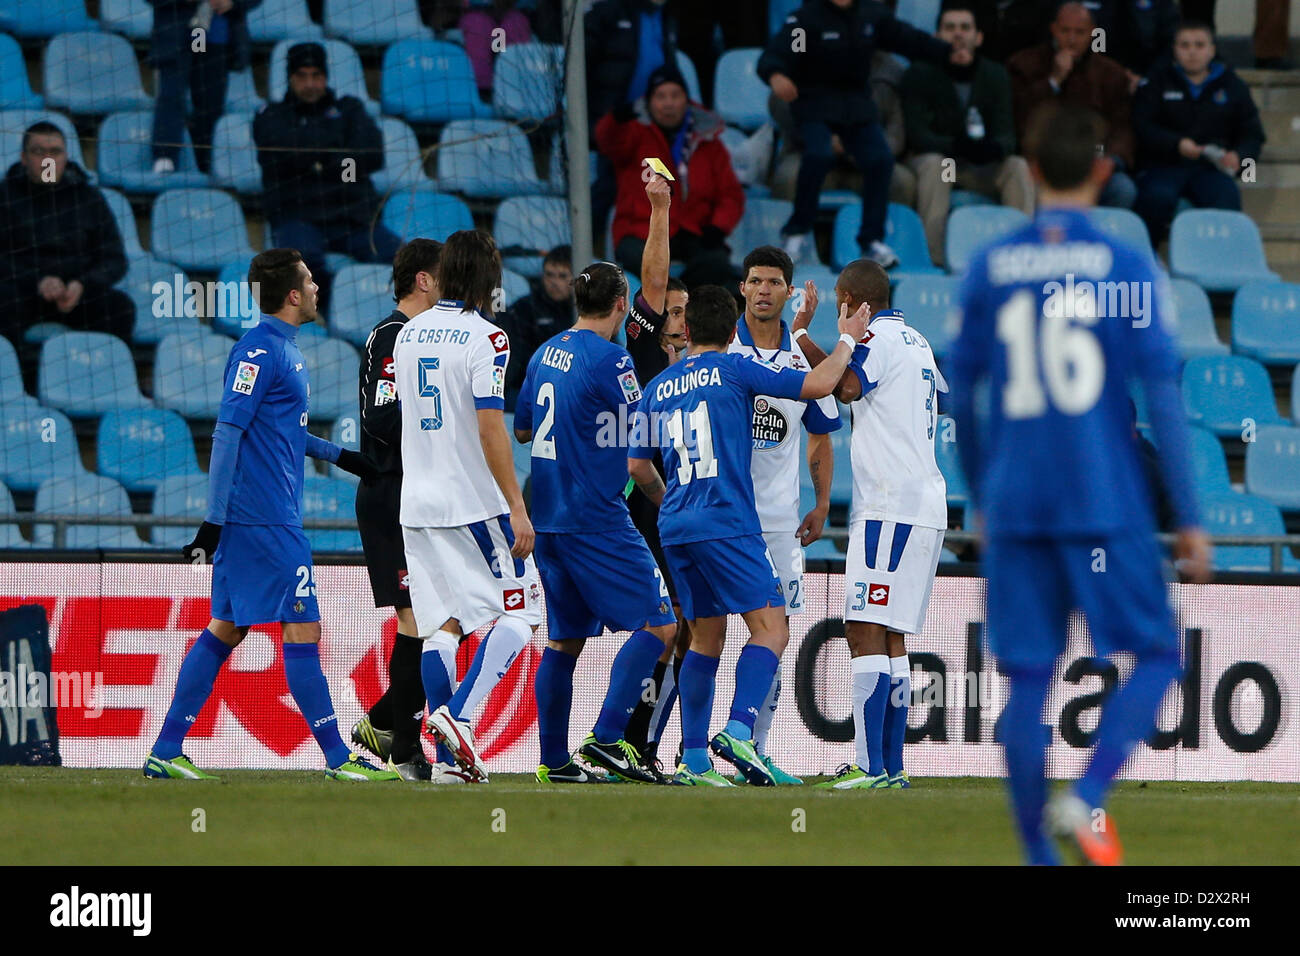 02.02.2013. Madrid, Spain.   La Liga football match played  between Getafe C.F. versus   R.C. Deportivo de la Courna (3-1) at Alfonso Perez stadium. The picture shows as Abel Aguilar receives a red card and is sent off. Stock Photo